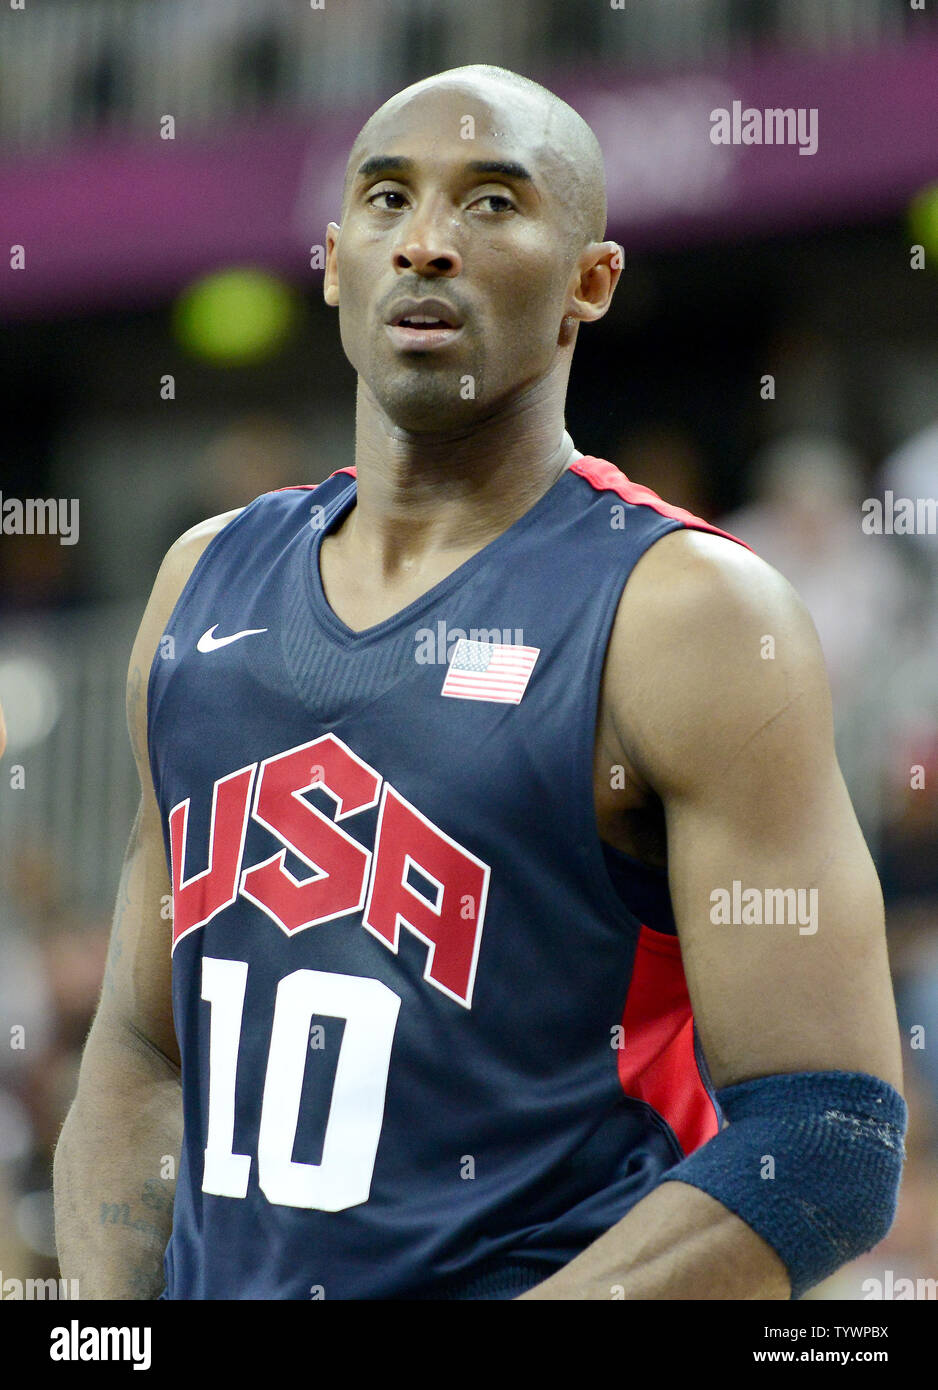 Guard Kobe Bryant (10) of the United States takes a break during first half action against Tunisia in a preliminary round - group A basketball game at the London 2012 Summer Olympics on July 31, 2012 in London.  UPI/Ron Sachs Stock Photo